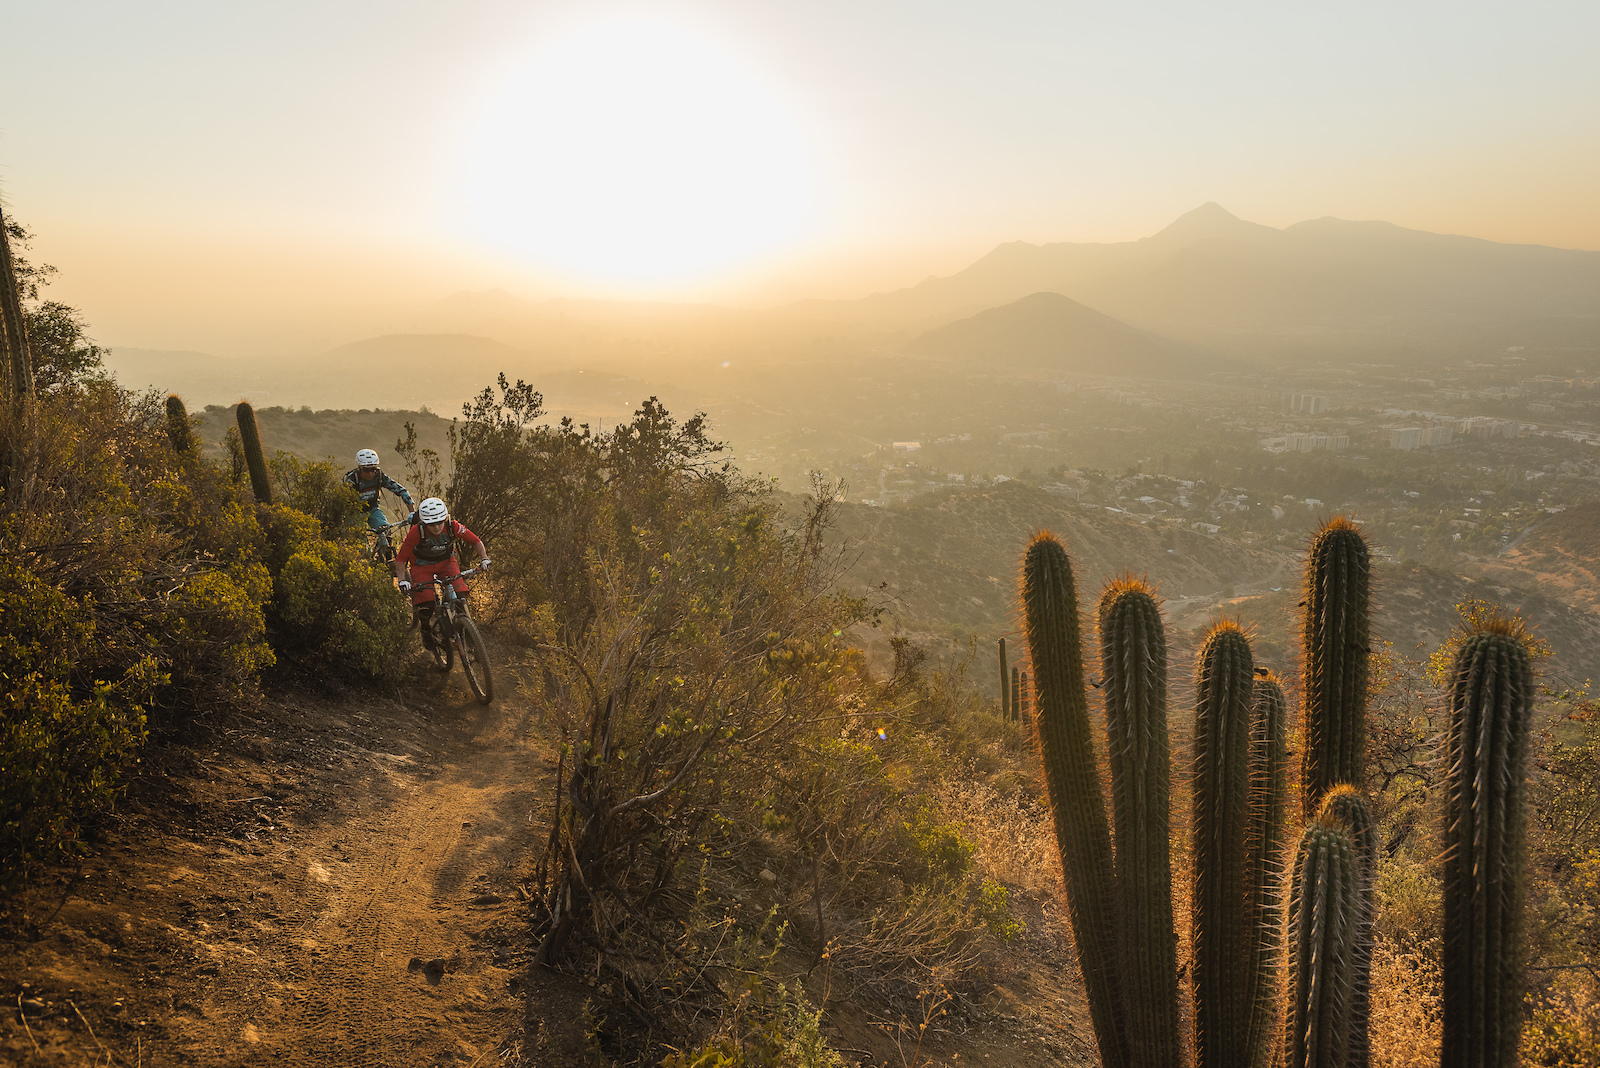 Sarah Rawley and Nate Hills ride the local trails in Las Varas accessable right out of the city of Santiago Chile